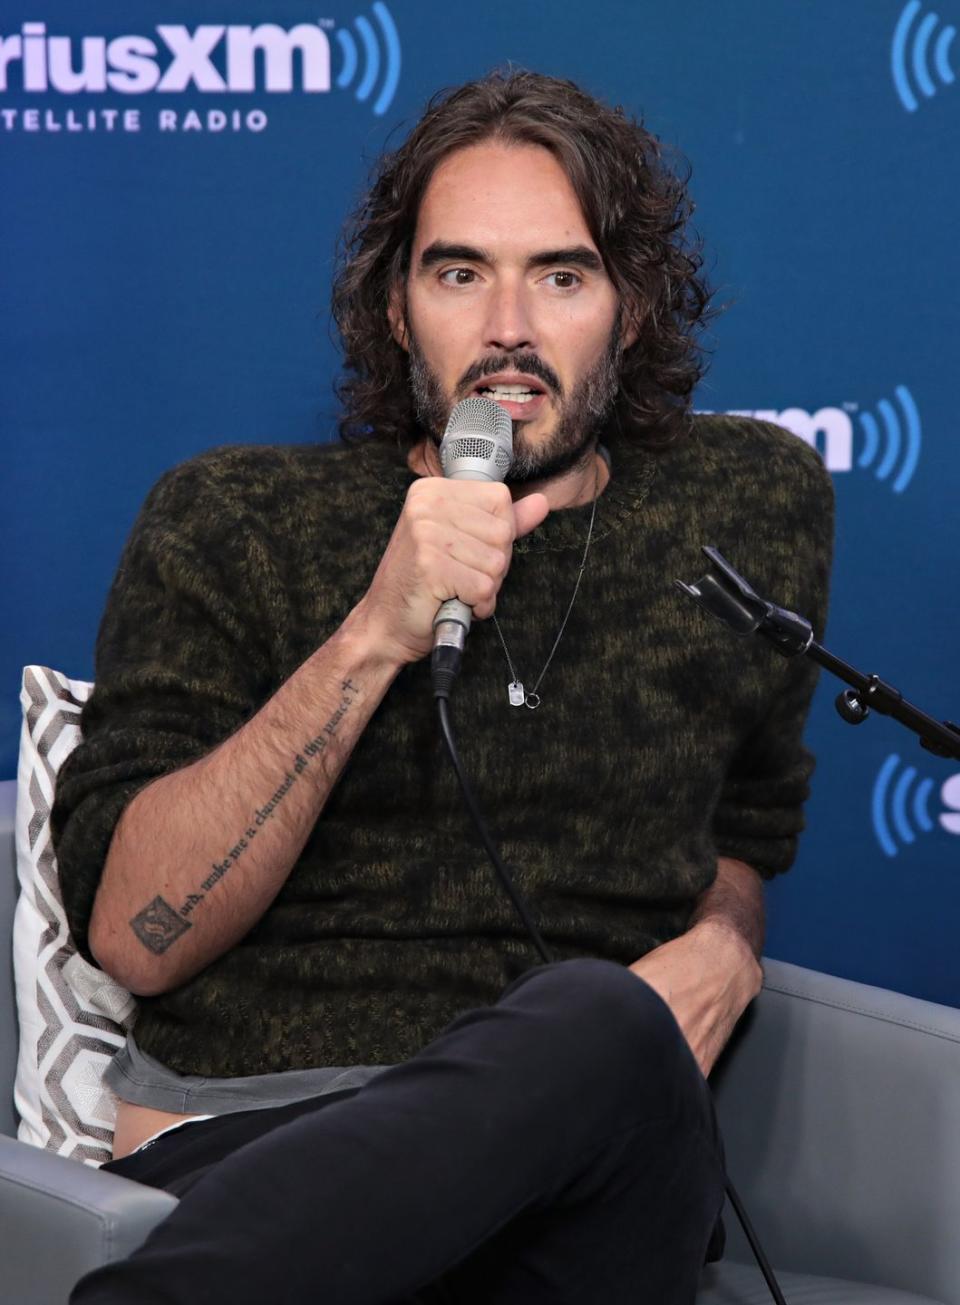 russell brand at an event in 2017, he sits in front of a blue background, talking into a microphone and wearing a dark jumper